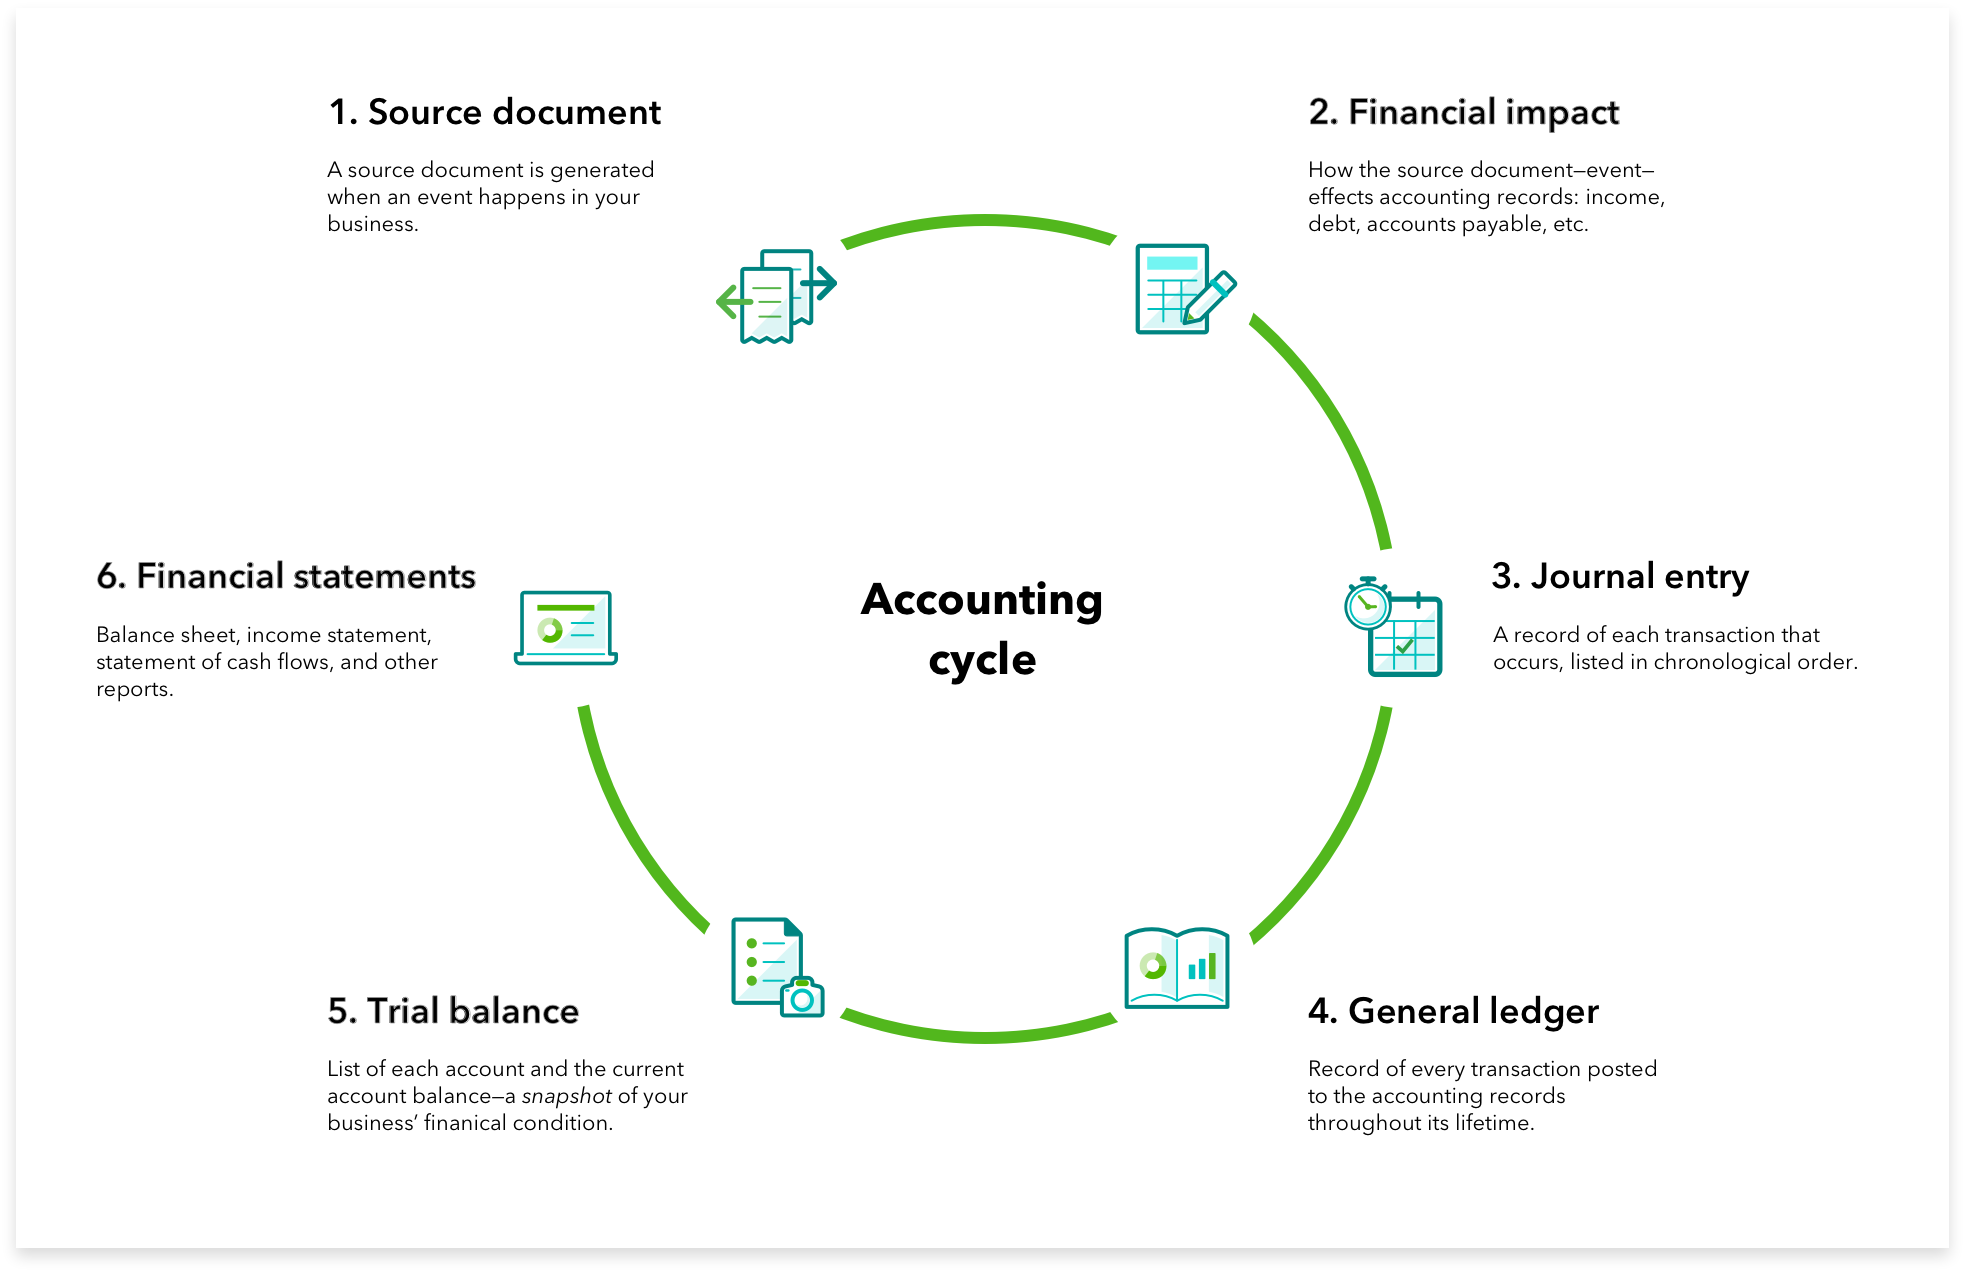 An example of accounting cycle for a small business.